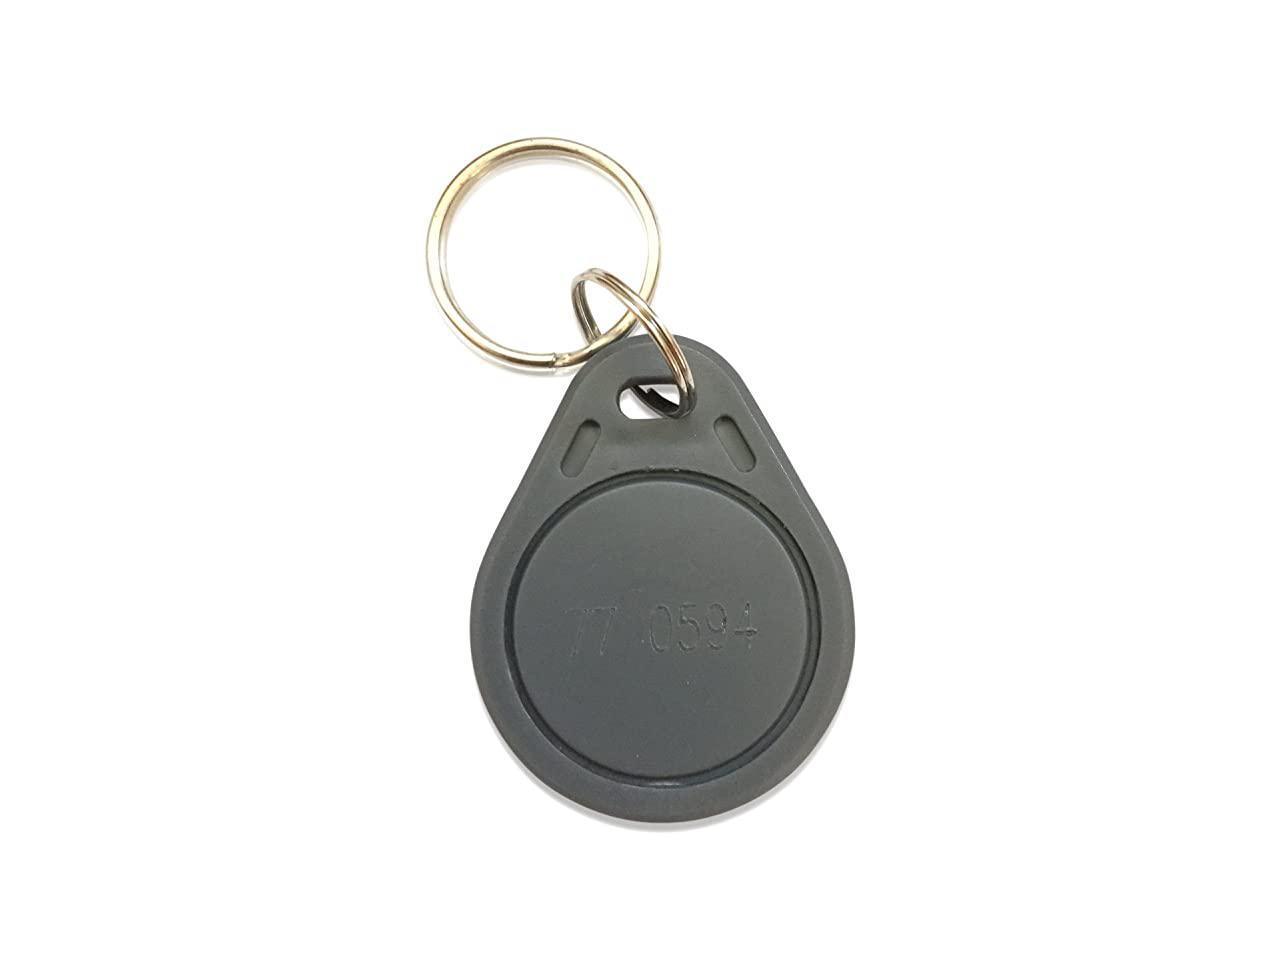 Works with The vast Majority of Access Control Systems 10pcs 26 Bit Proximity Key Fobs Weigand Prox Keyfobs Compatable with ISOProx 1386 1326 H10301 Format Readers